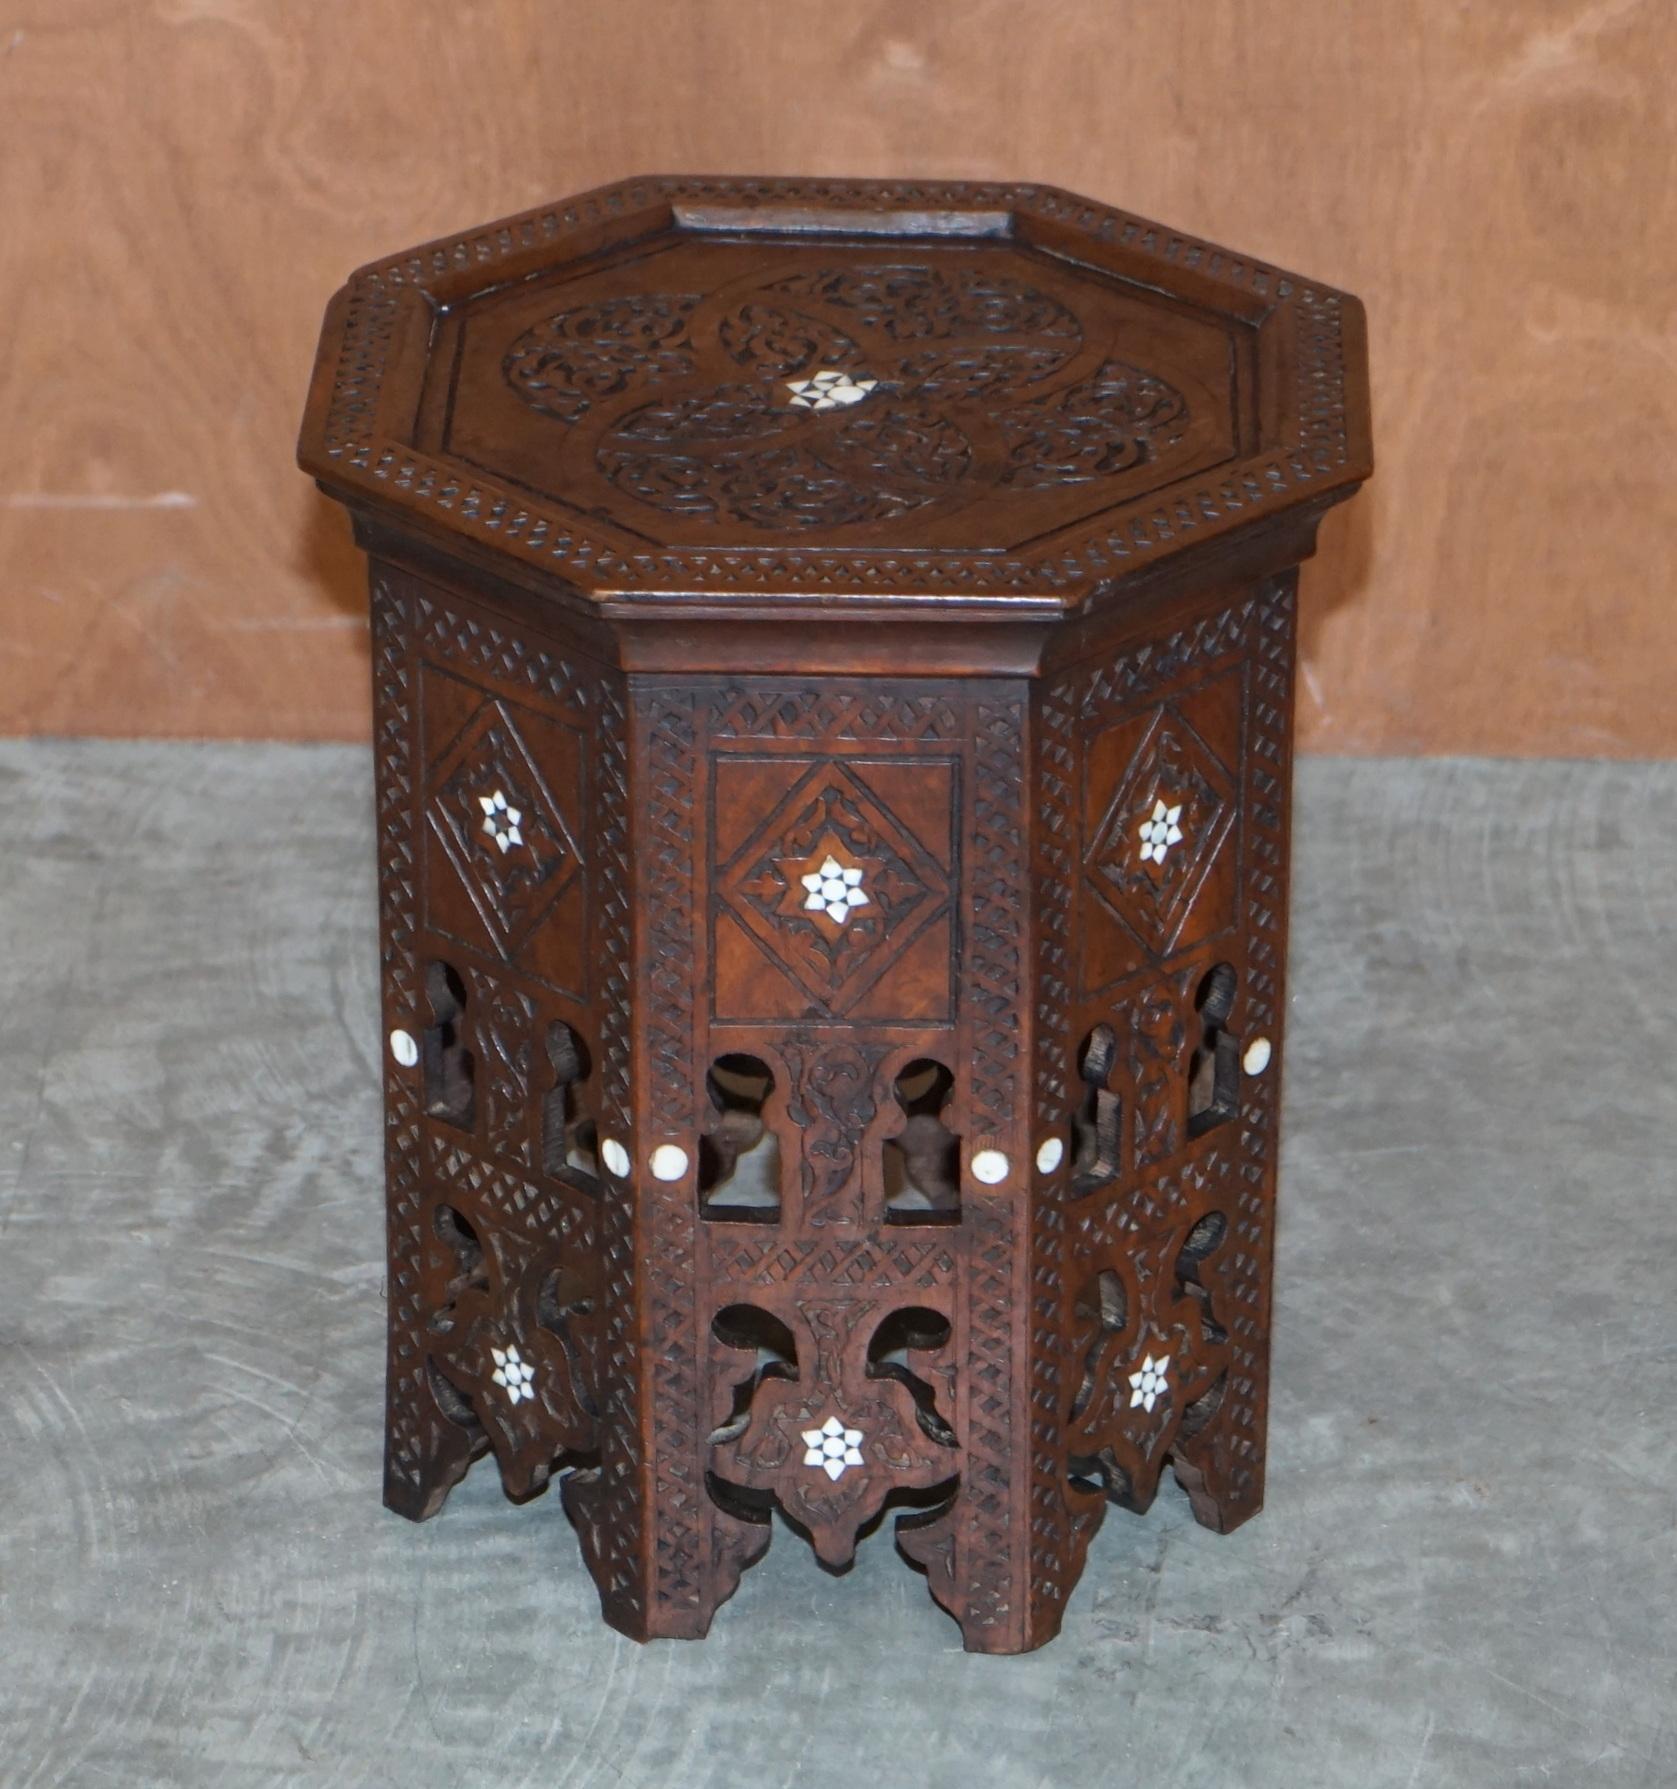 We are delighted to offer for sale this lovely hand carved from solid Rosewood Burmese side table of large proportions.

A very good looking and decorative table, this would be used as a lamp wine or side table but it’s a bit larger than